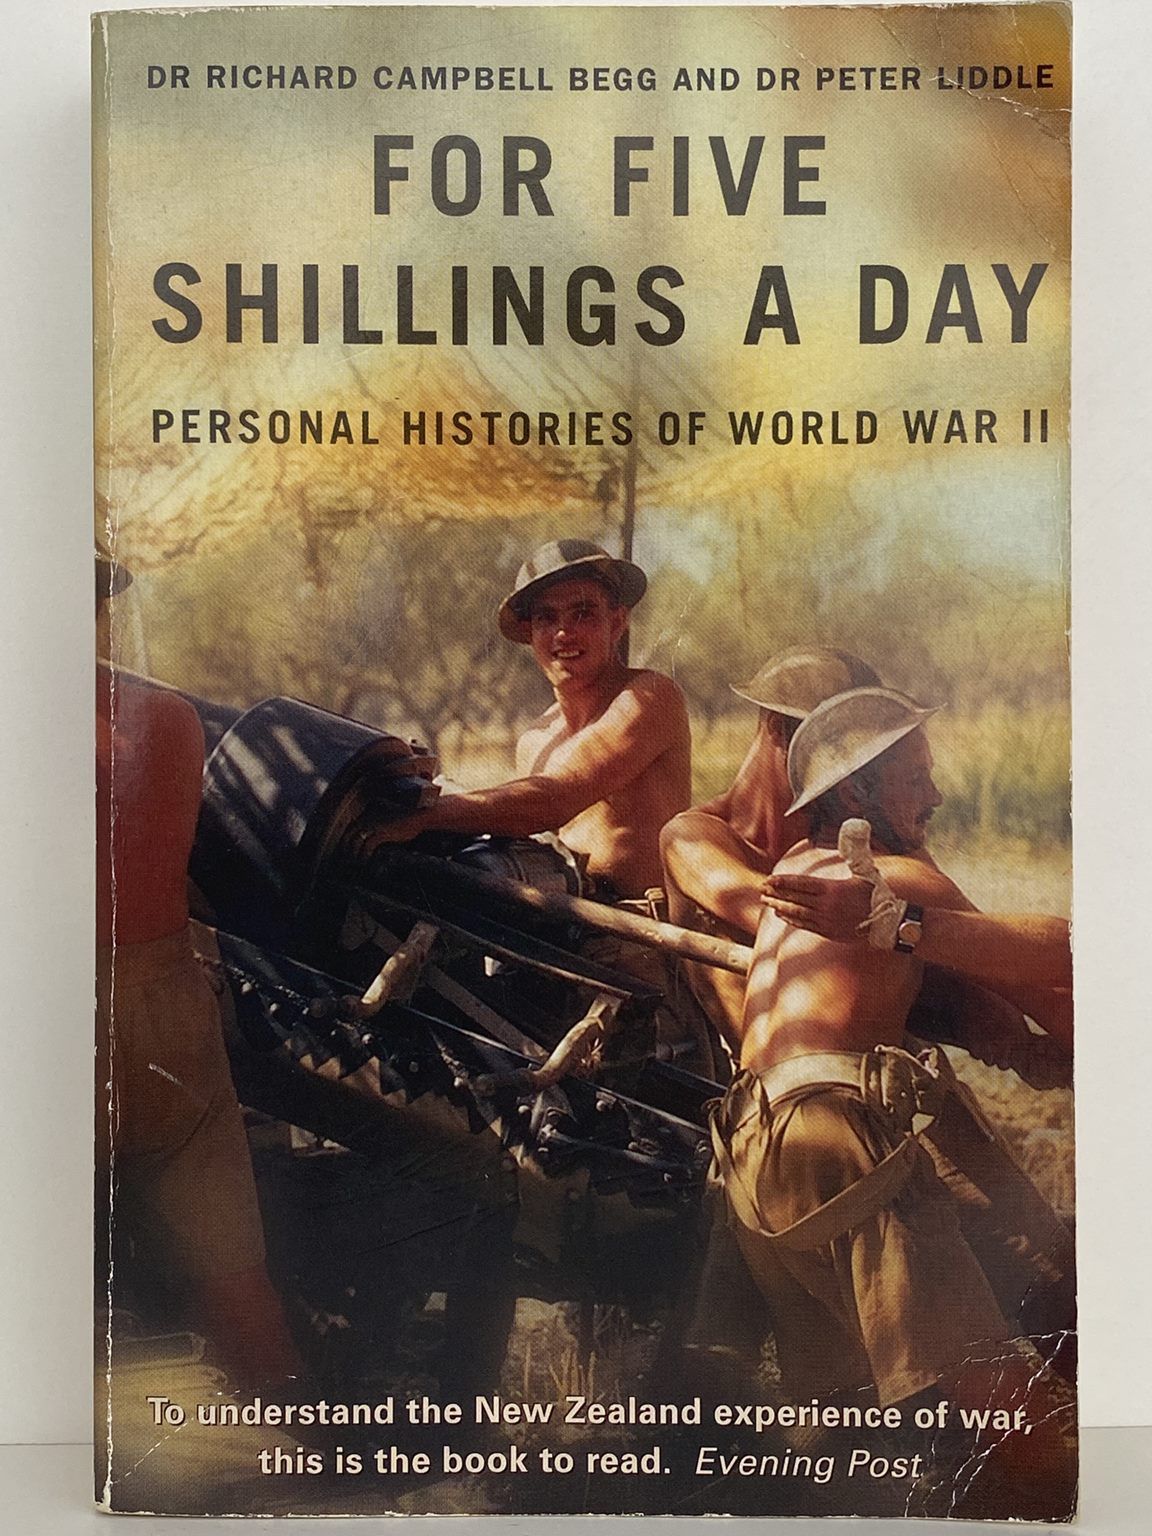 FOR FIVE SHILLINGS A DAY: Personal Histories of World War II